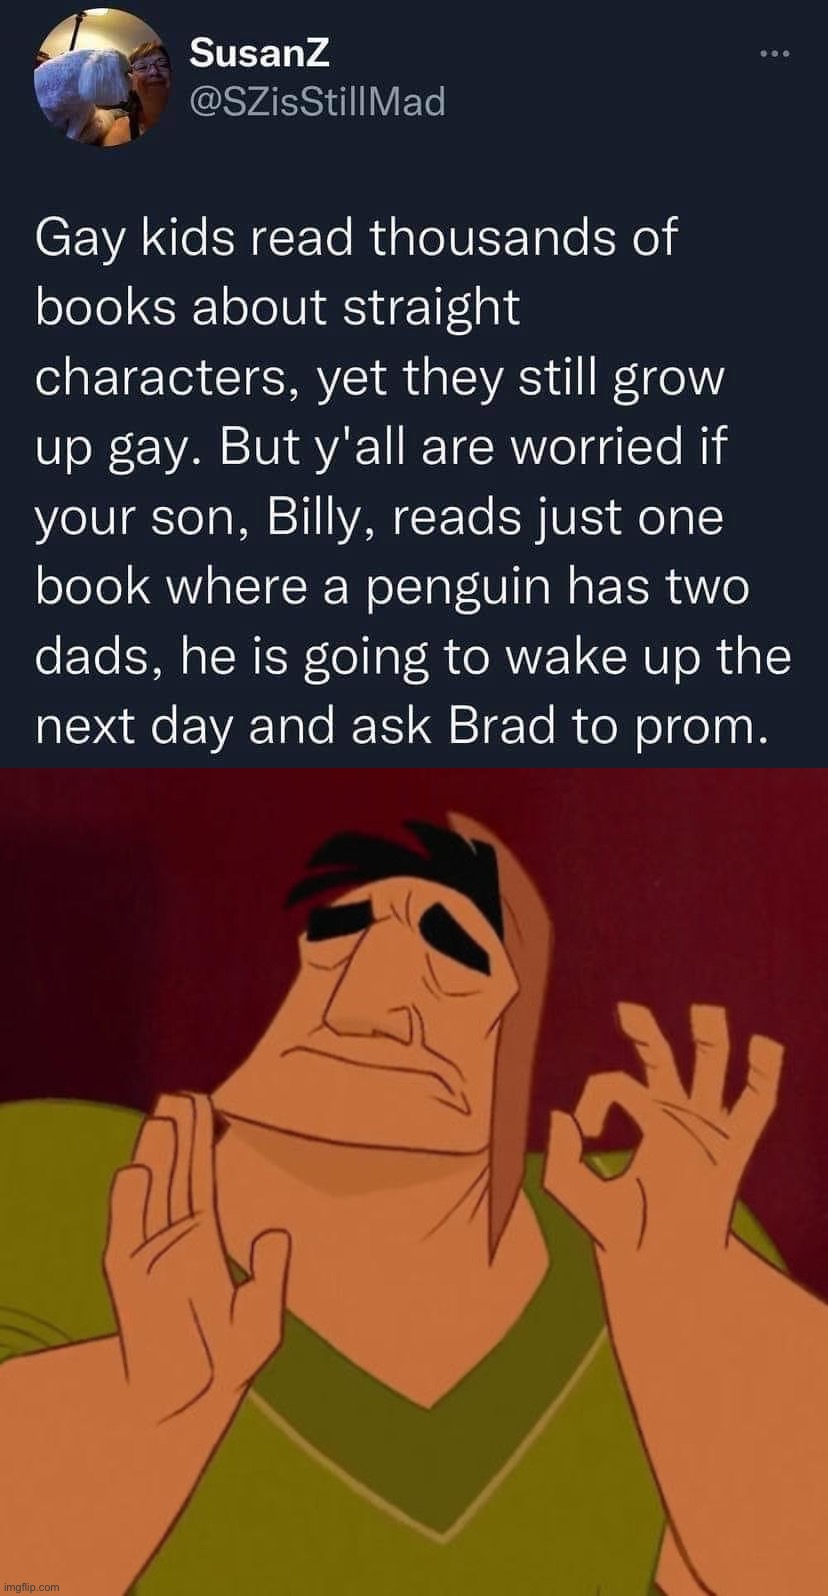 It really do be like that | image tagged in gay kids read thousands of books about straight characters,when x just right,gay,lgbtq,conservative logic,conservative hypocrisy | made w/ Imgflip meme maker